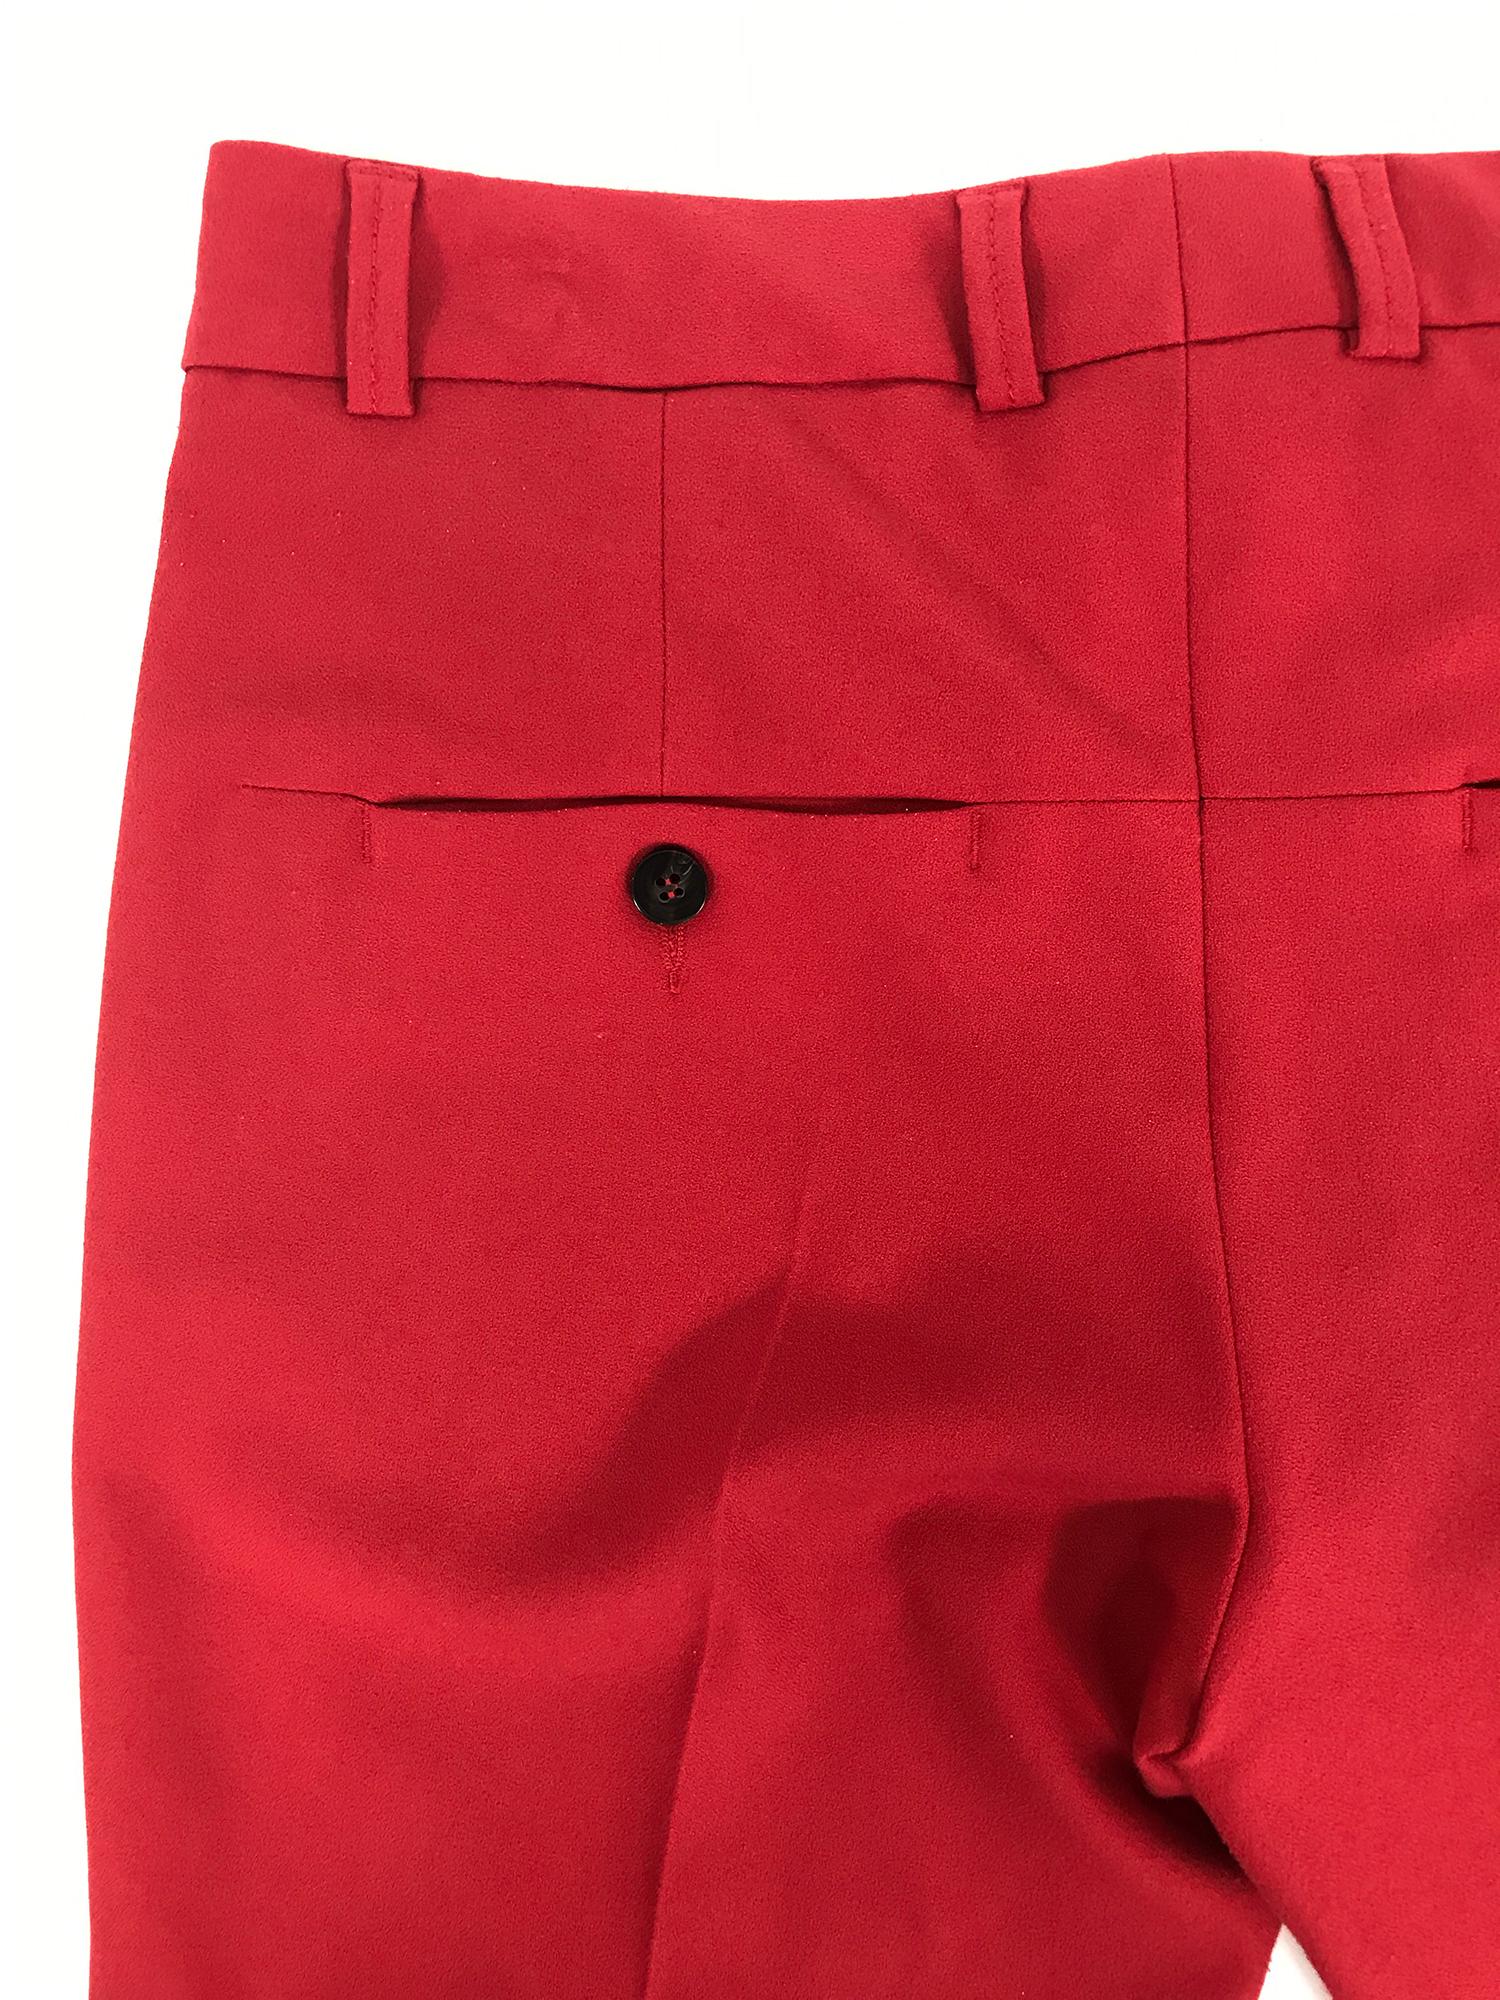 Rene Lezard Red Crepe Tapered Cuff Trousers 36  In Good Condition For Sale In West Palm Beach, FL